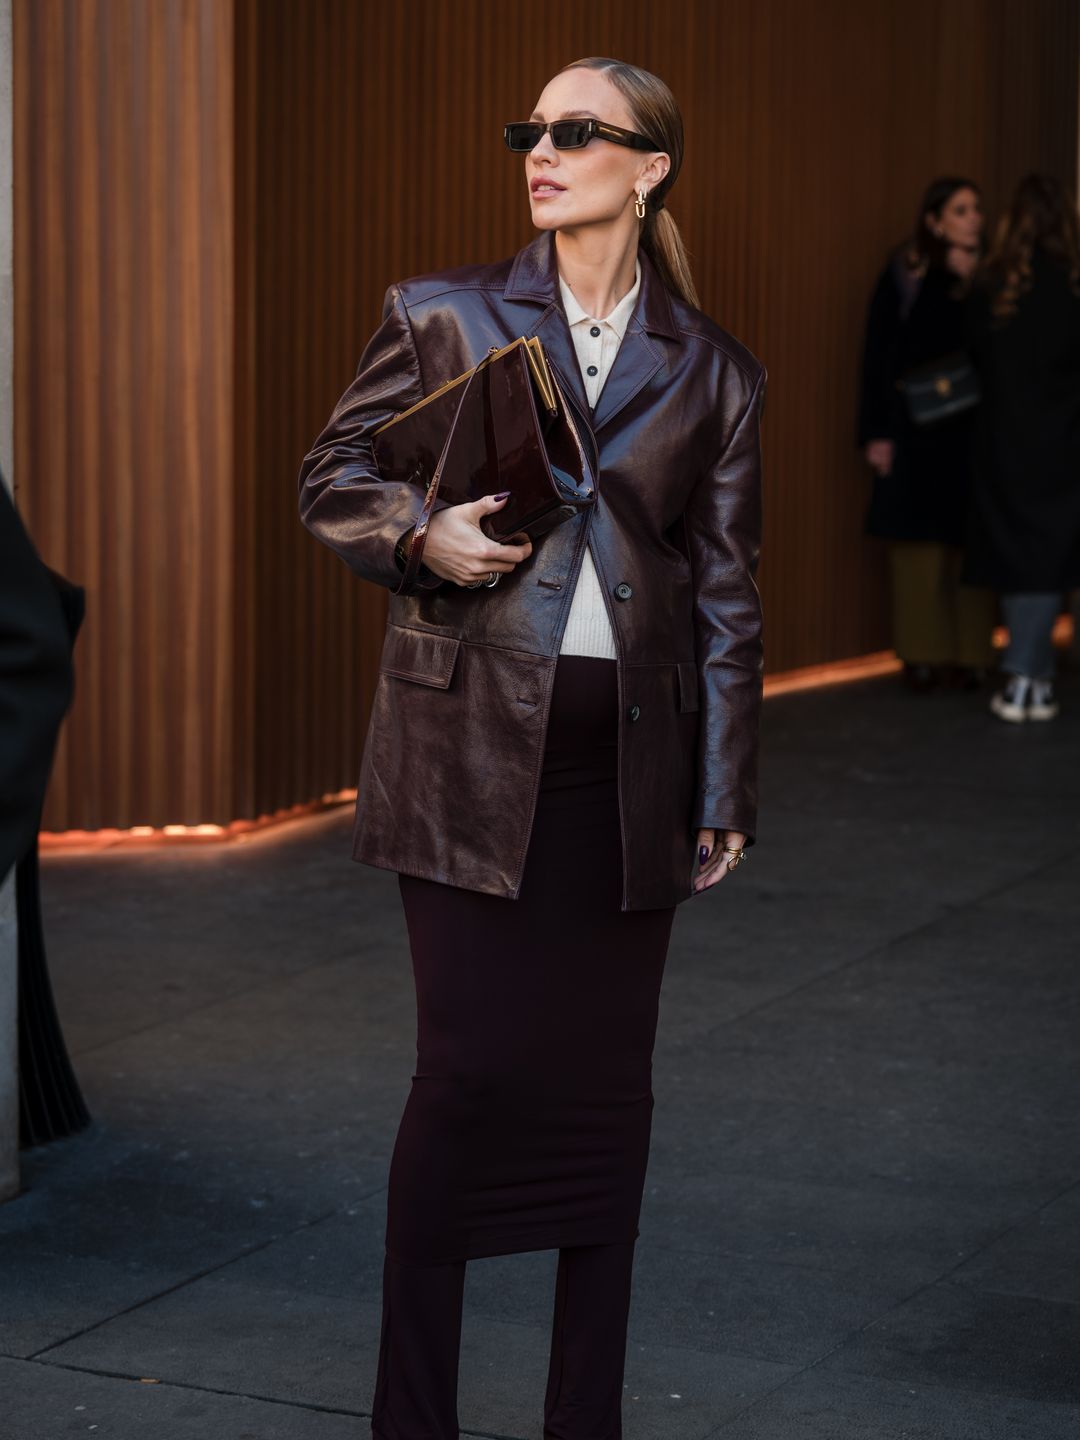 Viky Rader wears beige polo neck , brown leather blazer, brown skirt over pants, black heels with gold details, outside Zimmermann